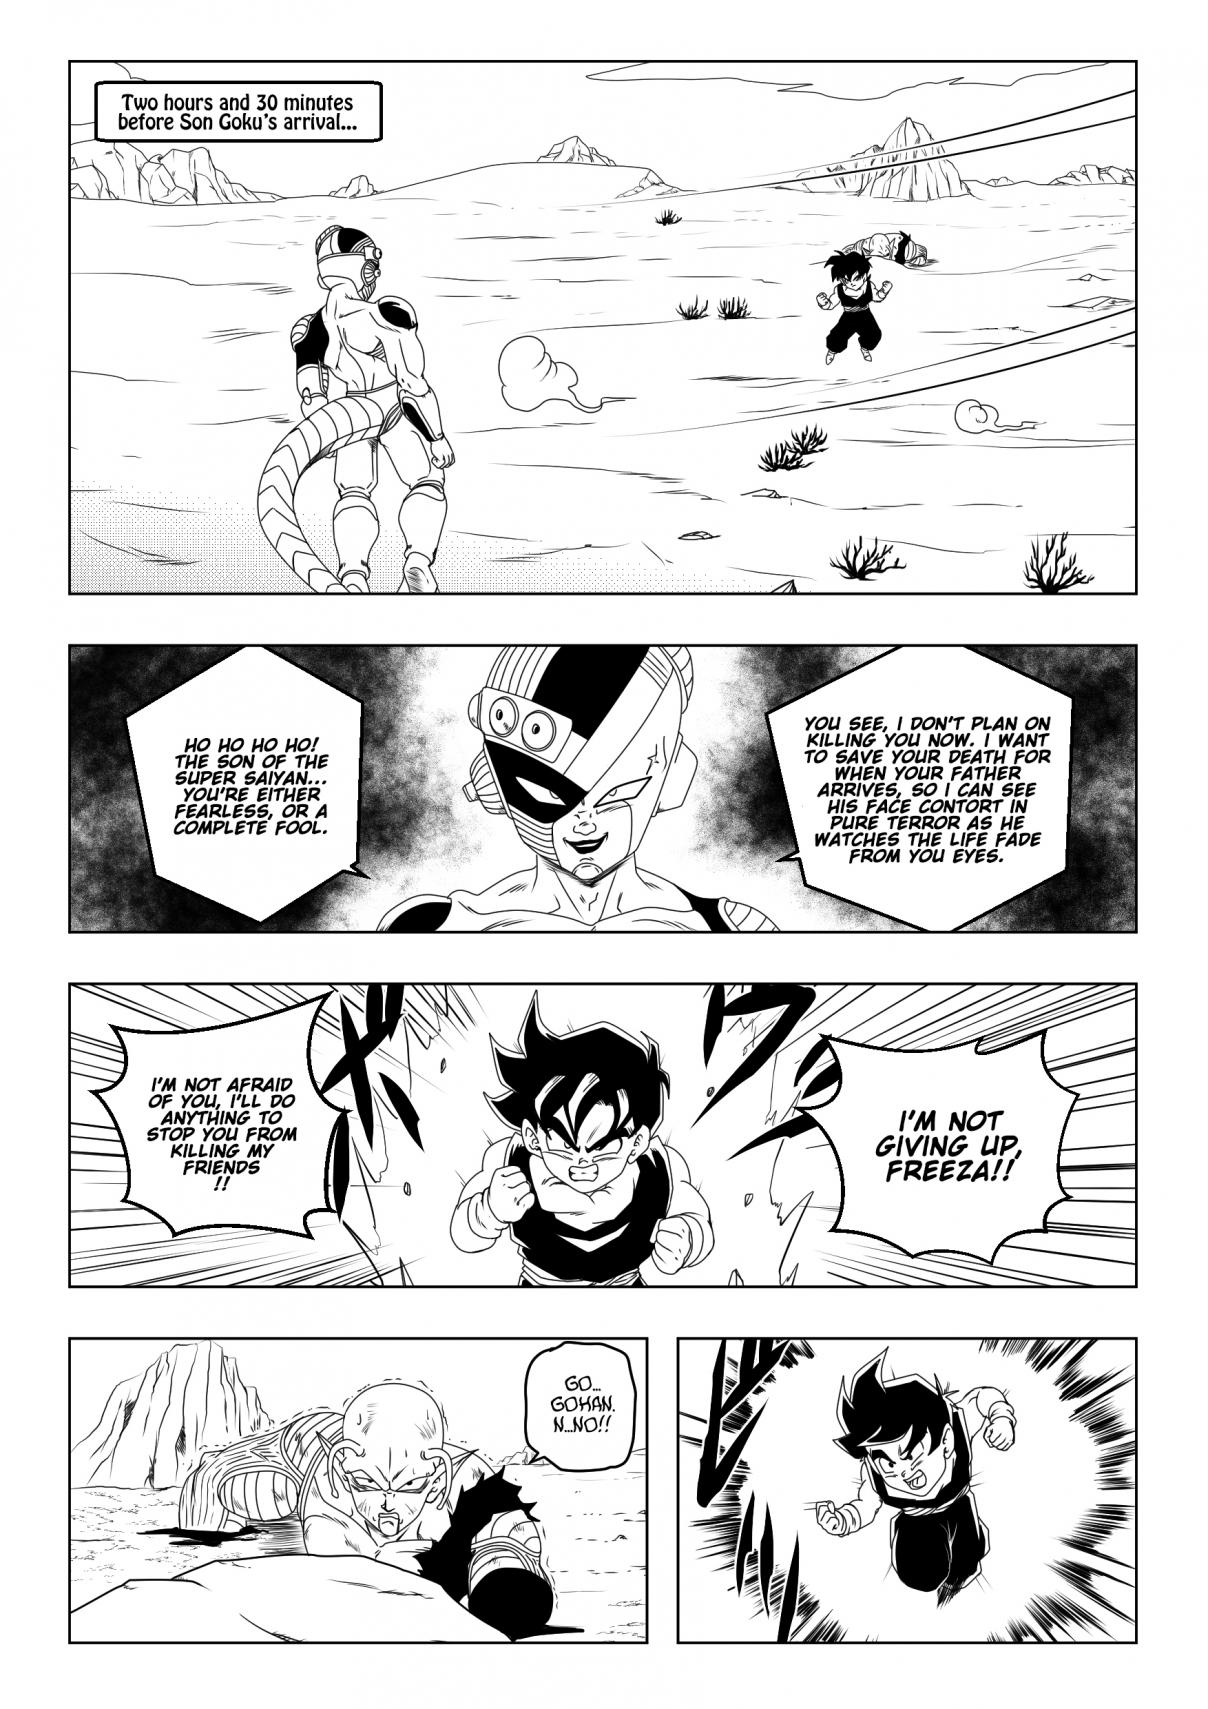 Dragon Ball Yardrats, The Story of a Survivor Ch. 11 The Last Fight of Son Goku